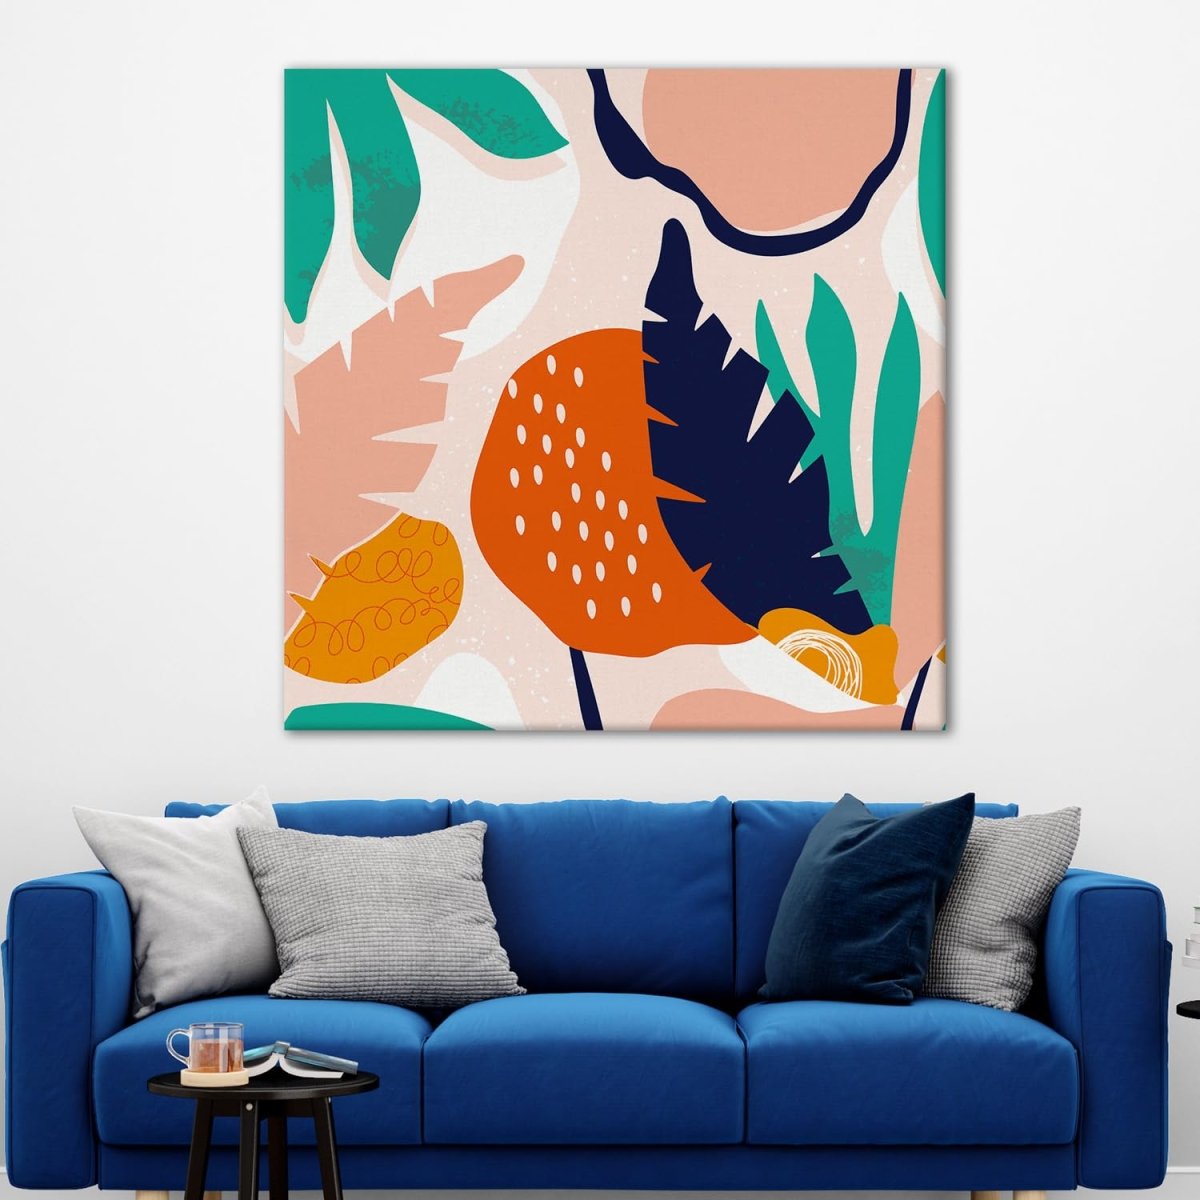 Flourish Canvas Wall Painting (36 x 36 Inches)